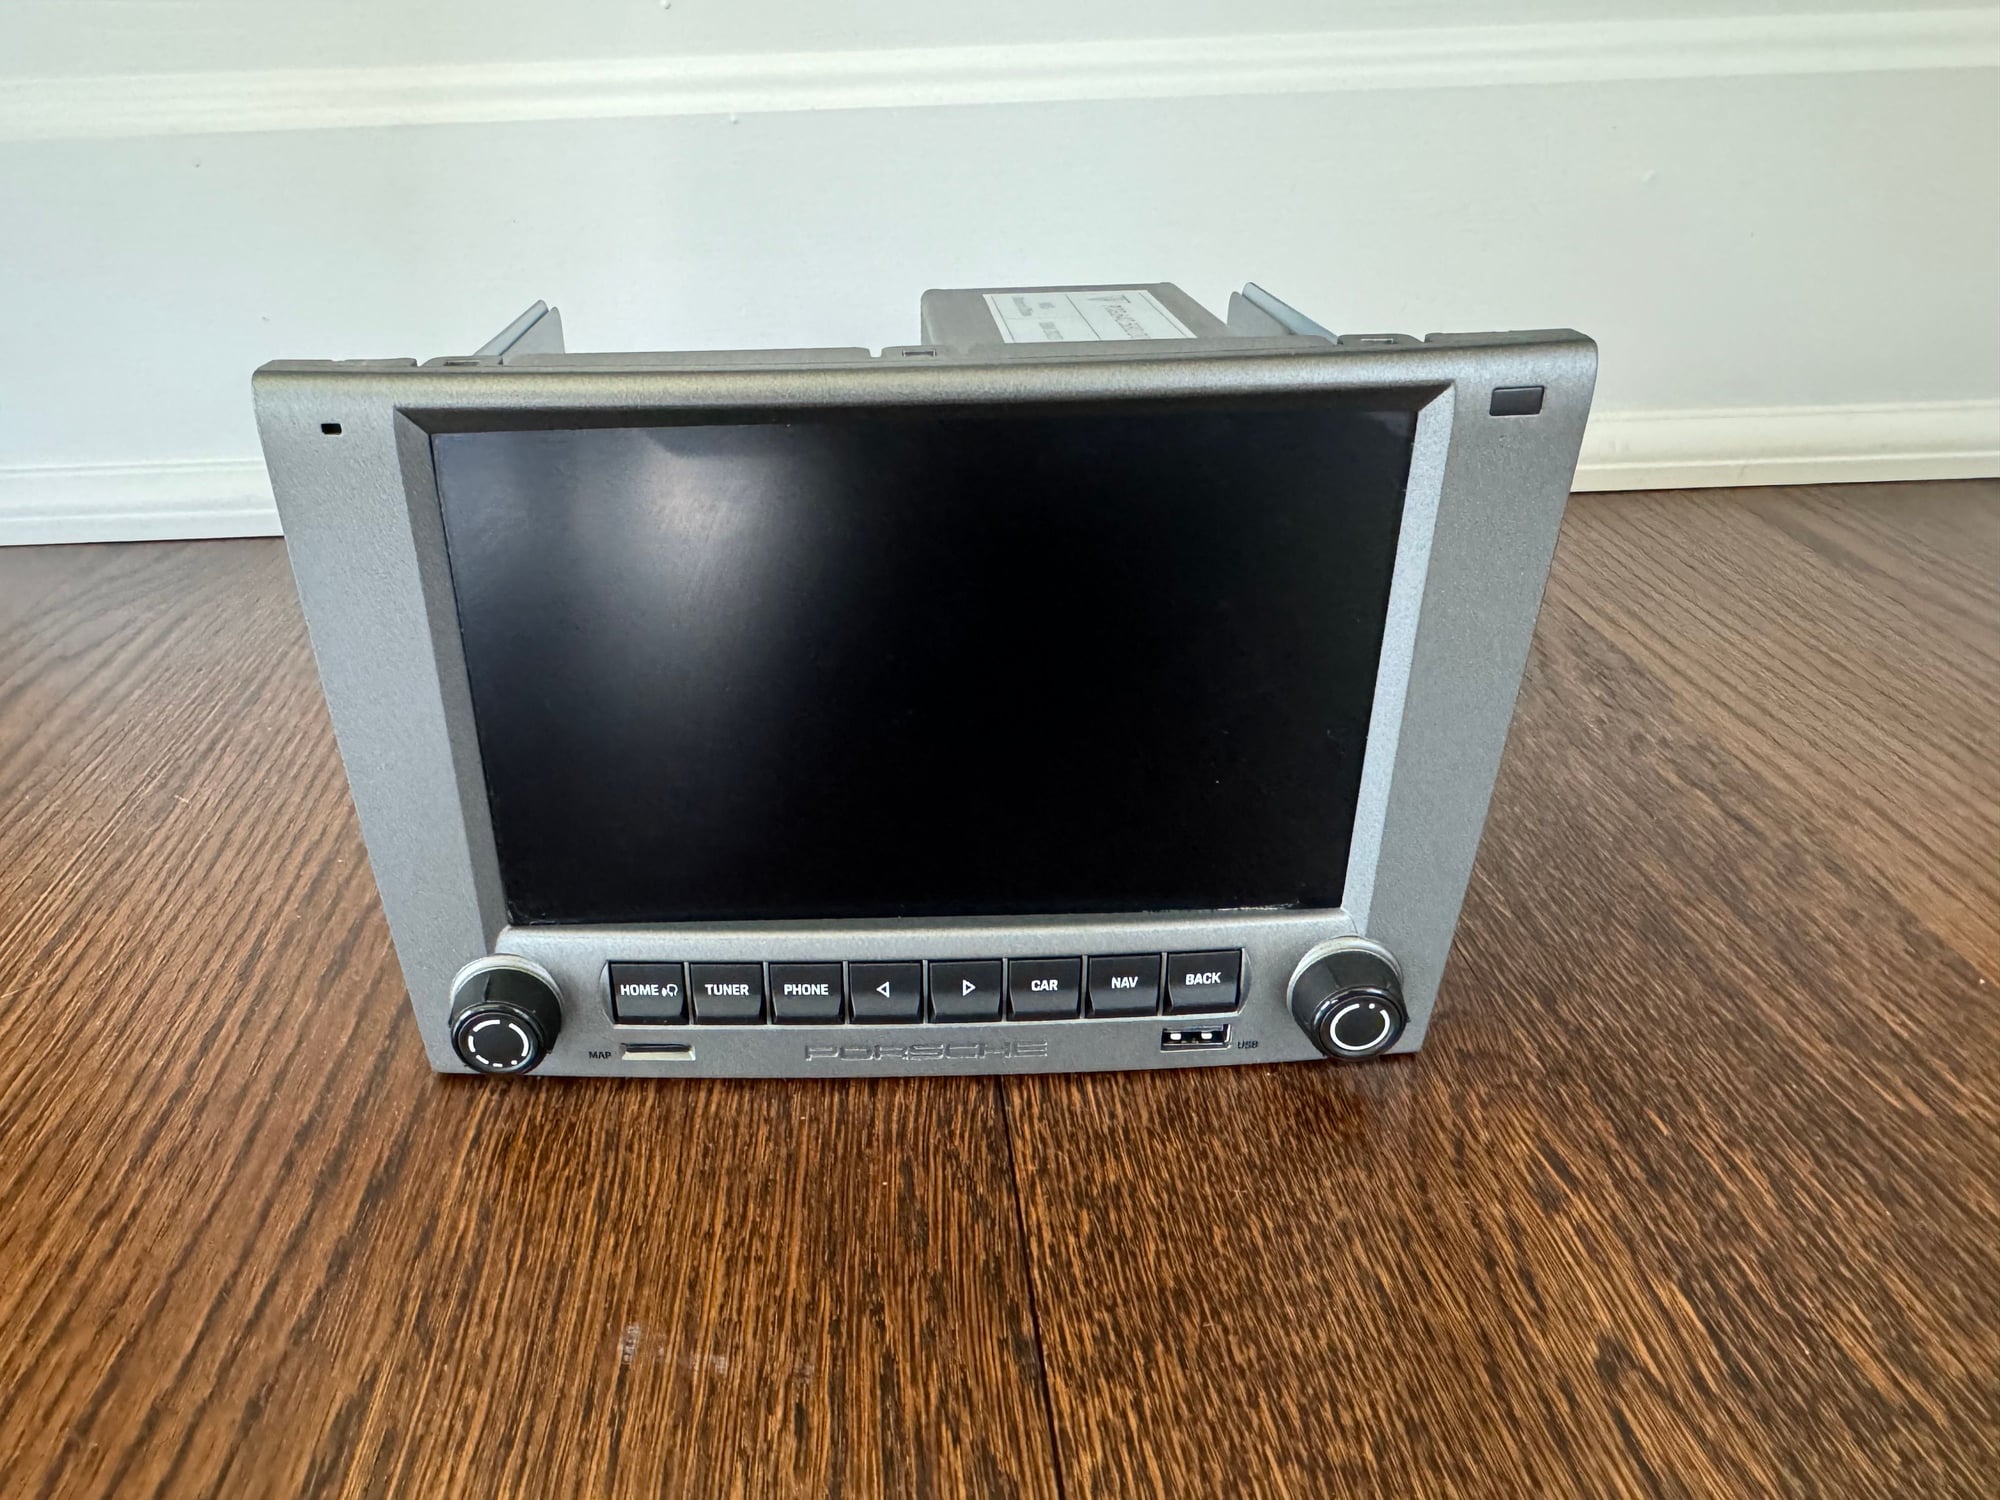 Audio Video/Electronics - PCCM+ for 997/987: Porsche Classic Radio. Boxed, all parts, verified working - Used - 2006 to 2008 Porsche GT3 - 2005 to 2008 Porsche 911 - 2005 to 2008 Porsche Boxster - 2006 to 2008 Porsche Cayman - New Canaan, CT 06840, United States